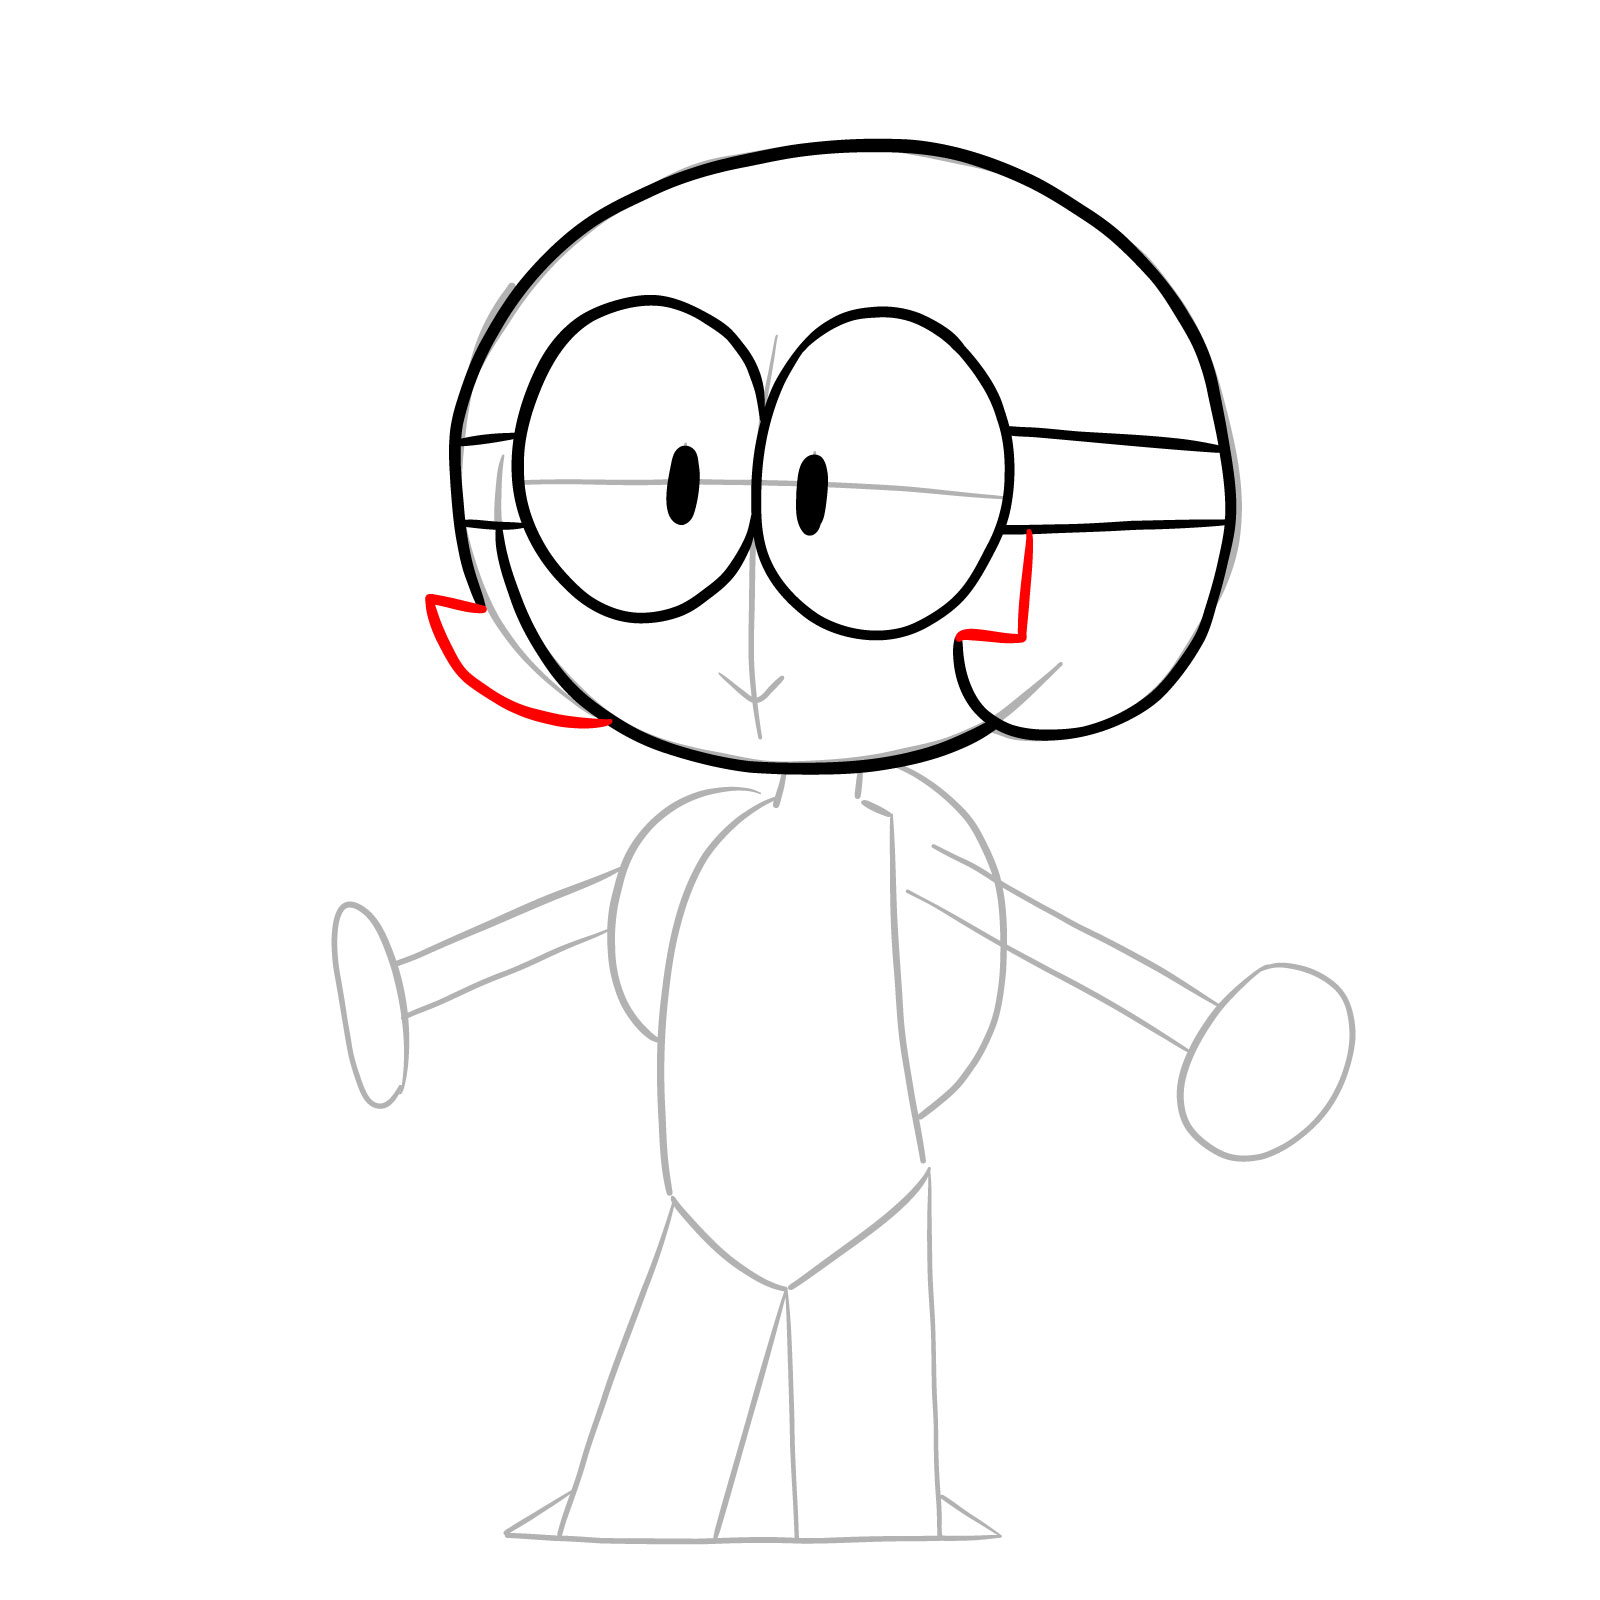 How to draw Dendy from OK K.O.! - step 08